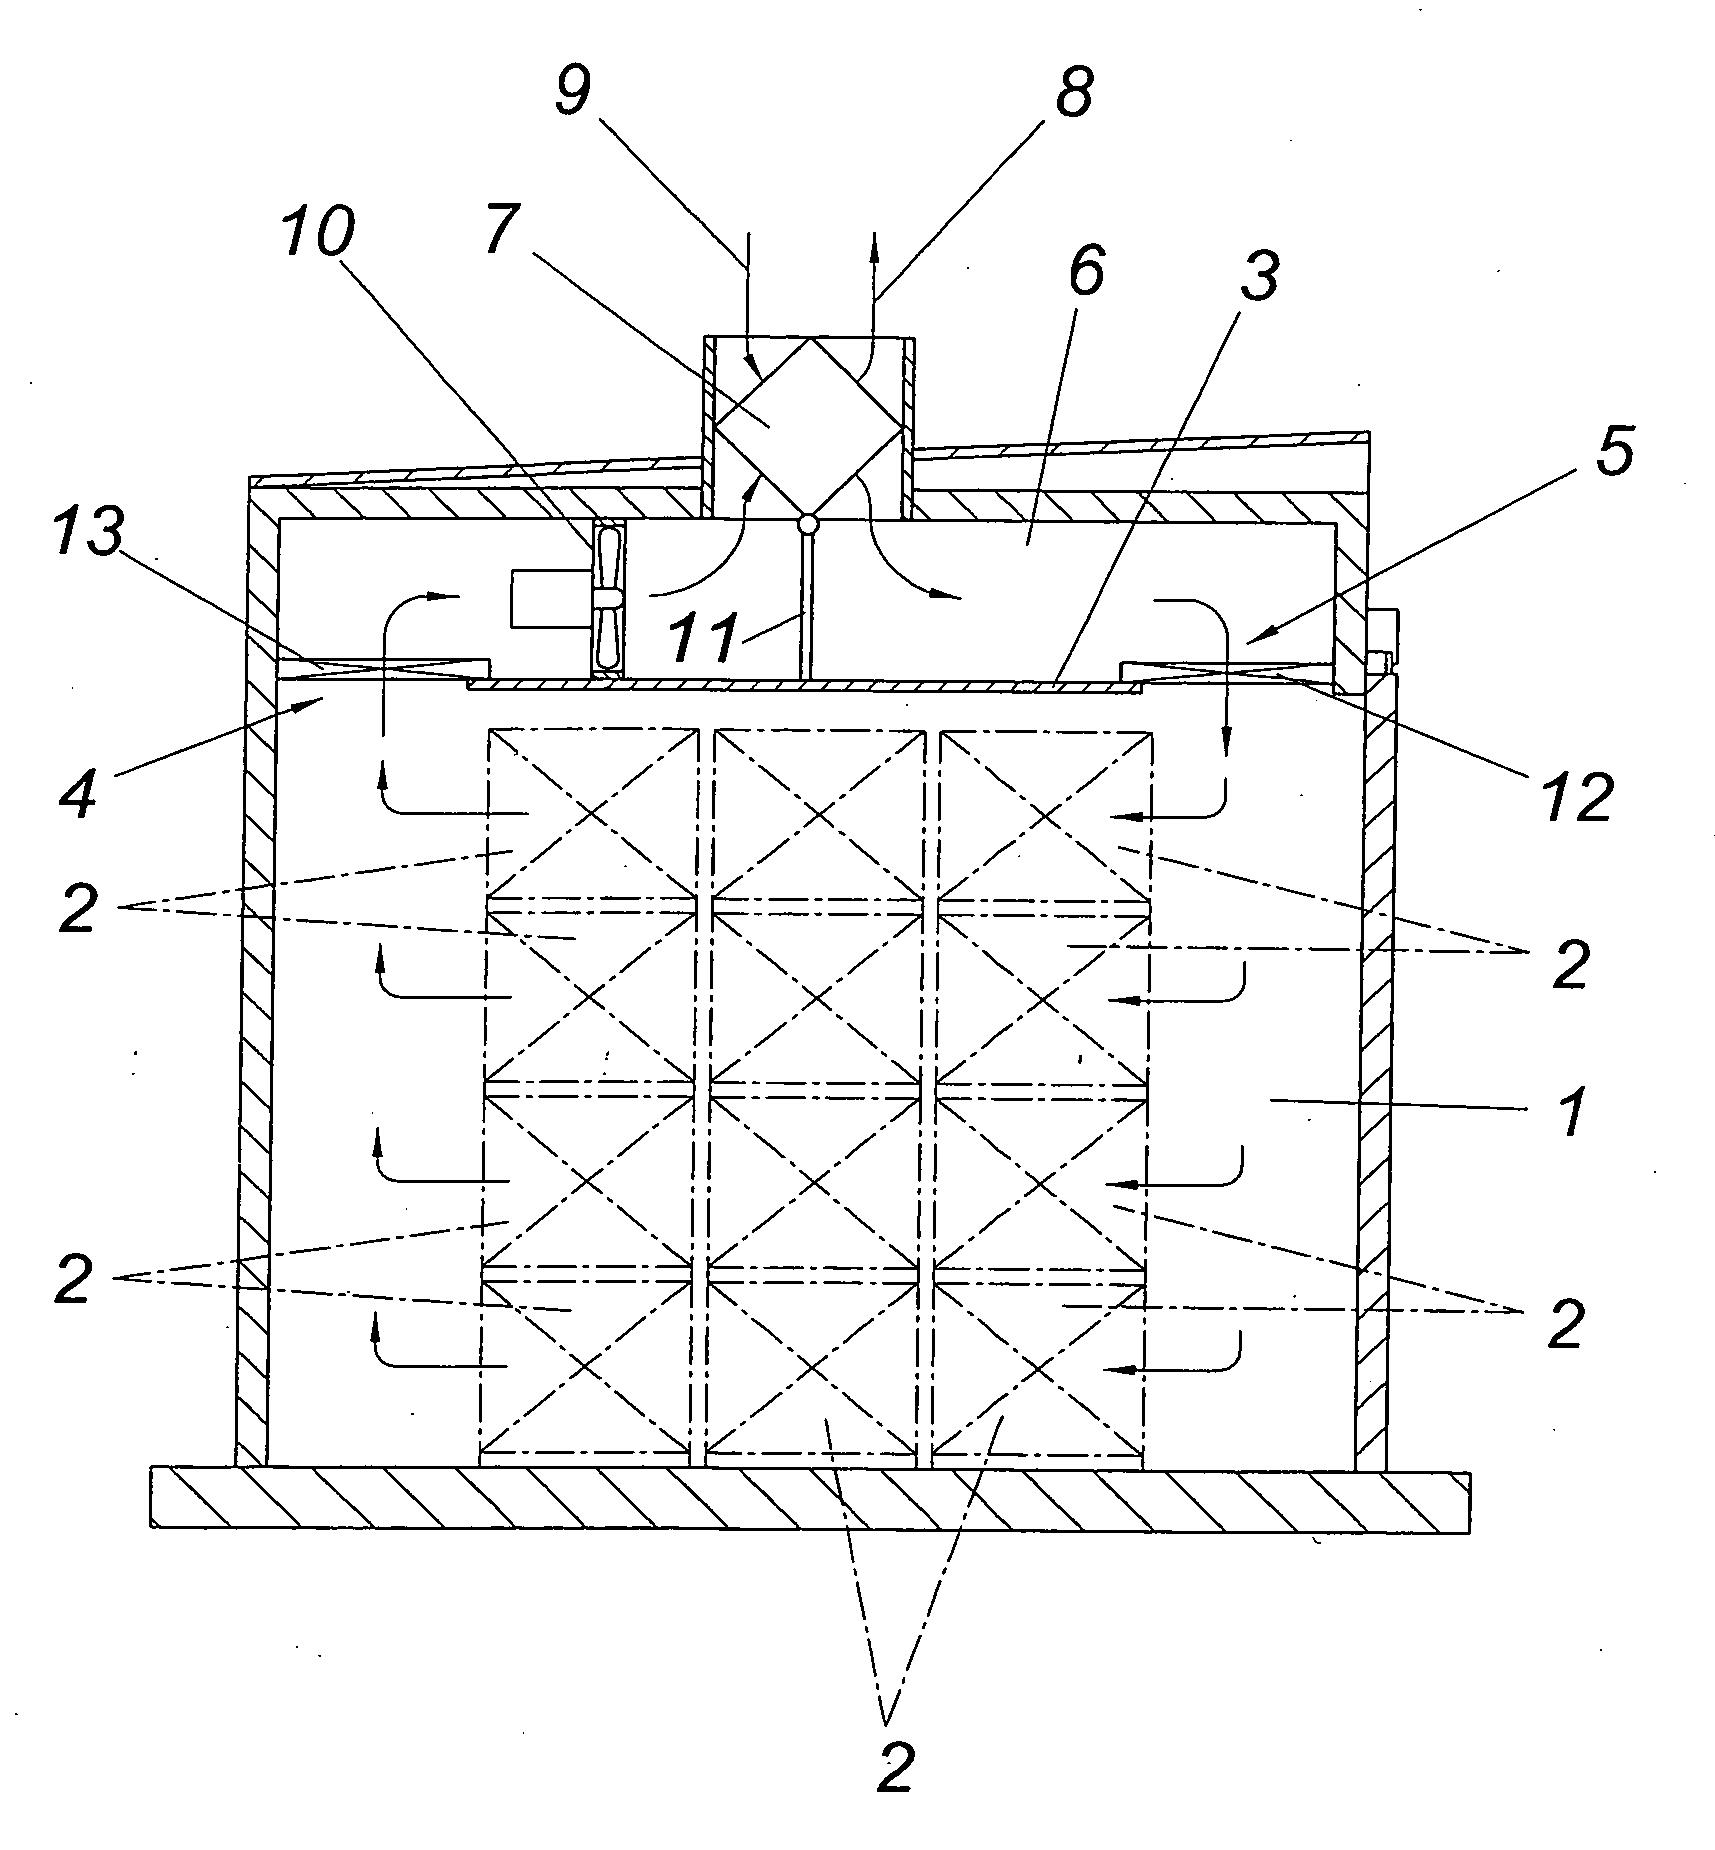 Method for Drying Wood Combined Into Stacks